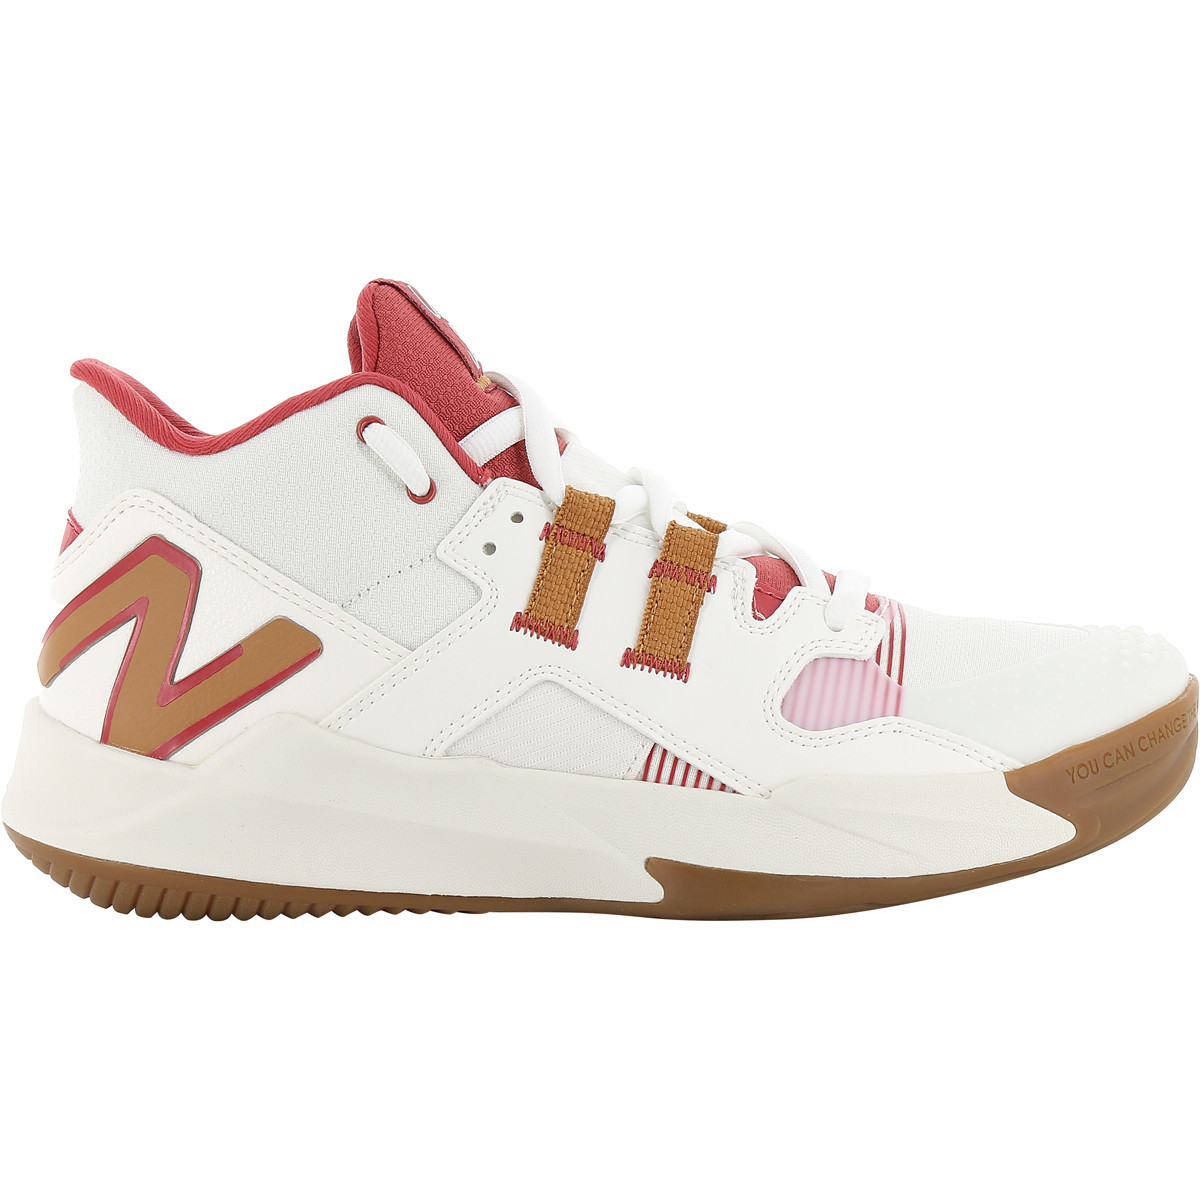 NEW BALANCE COCO CG1 ALL COURTS SHOES - NEW BALANCE - Men's - Shoes